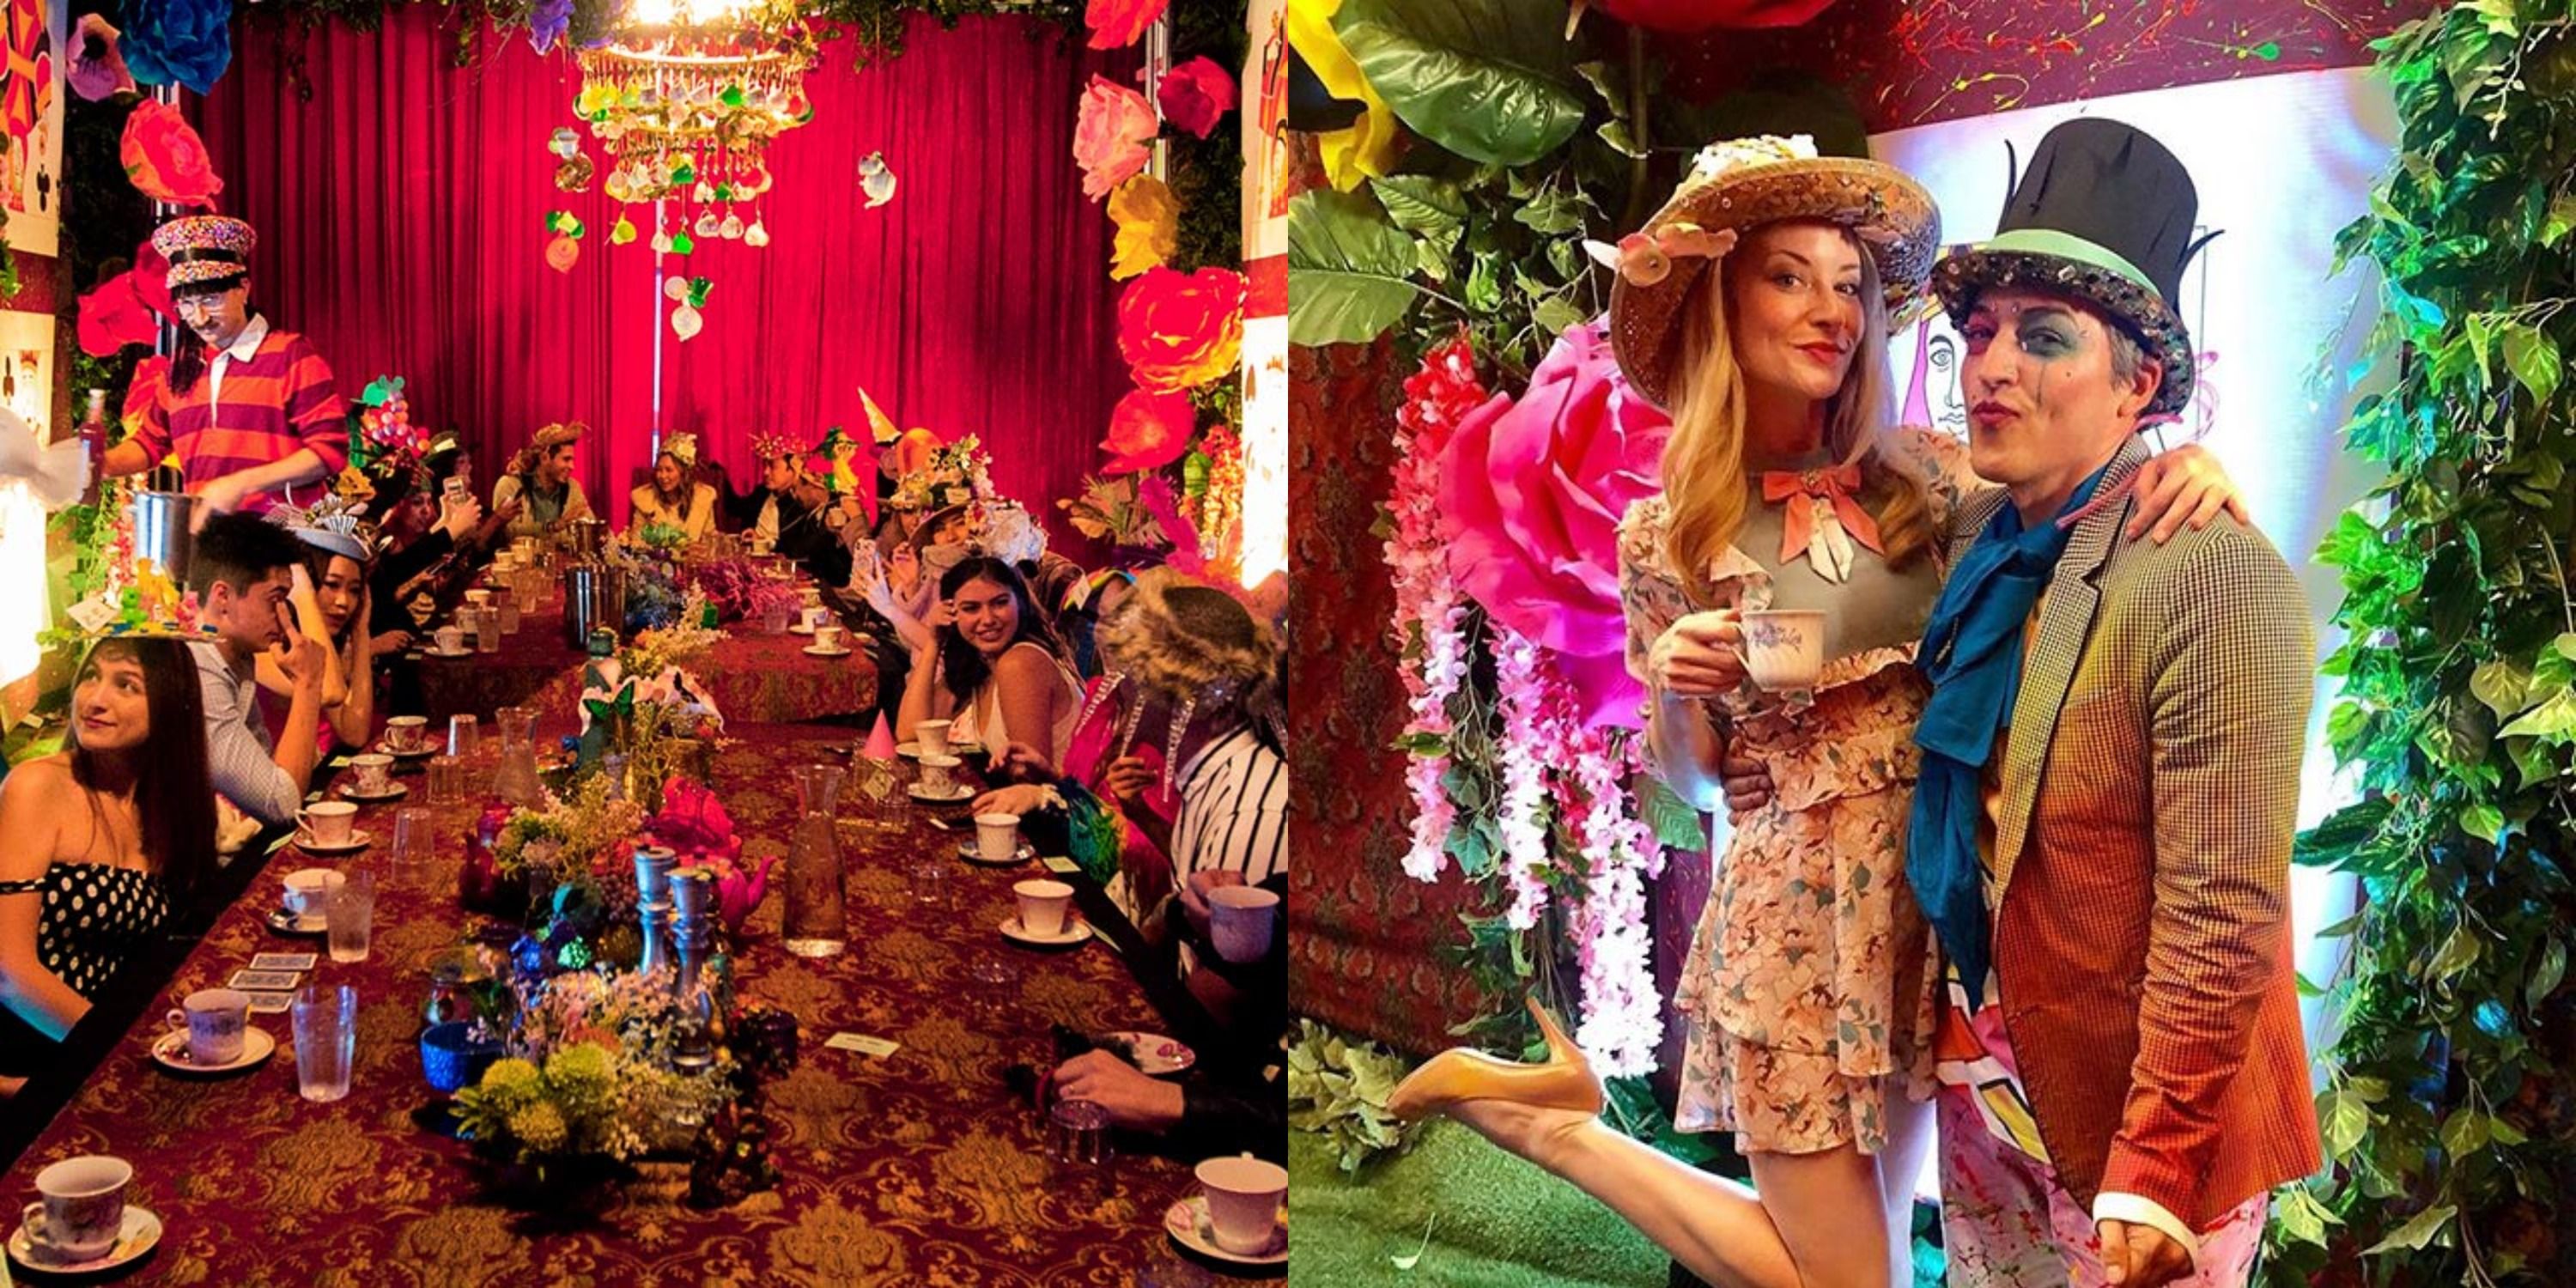 This Traveling Boozy Tea Party Was Inspired By Alice In Wonderland